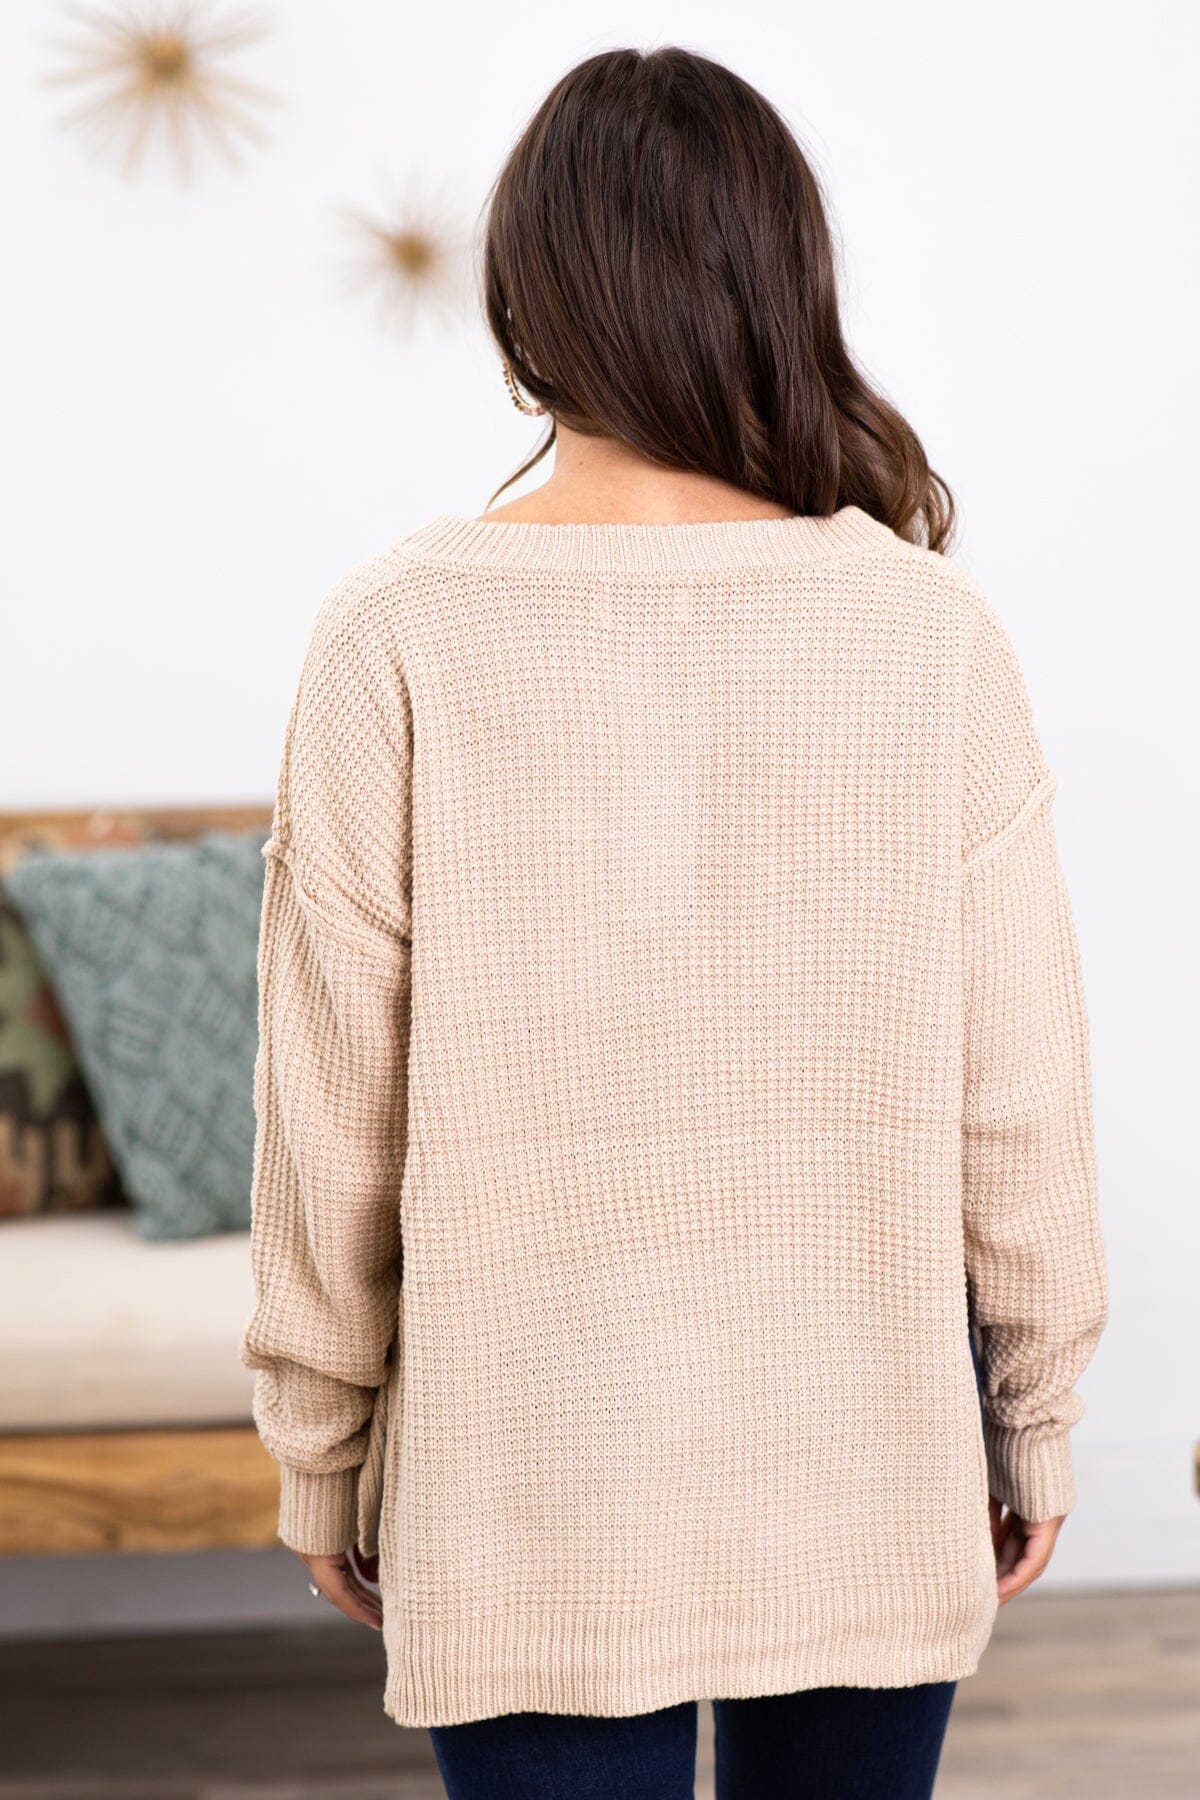 Beige Waffle Knit Sweater With Buttons - Filly Flair